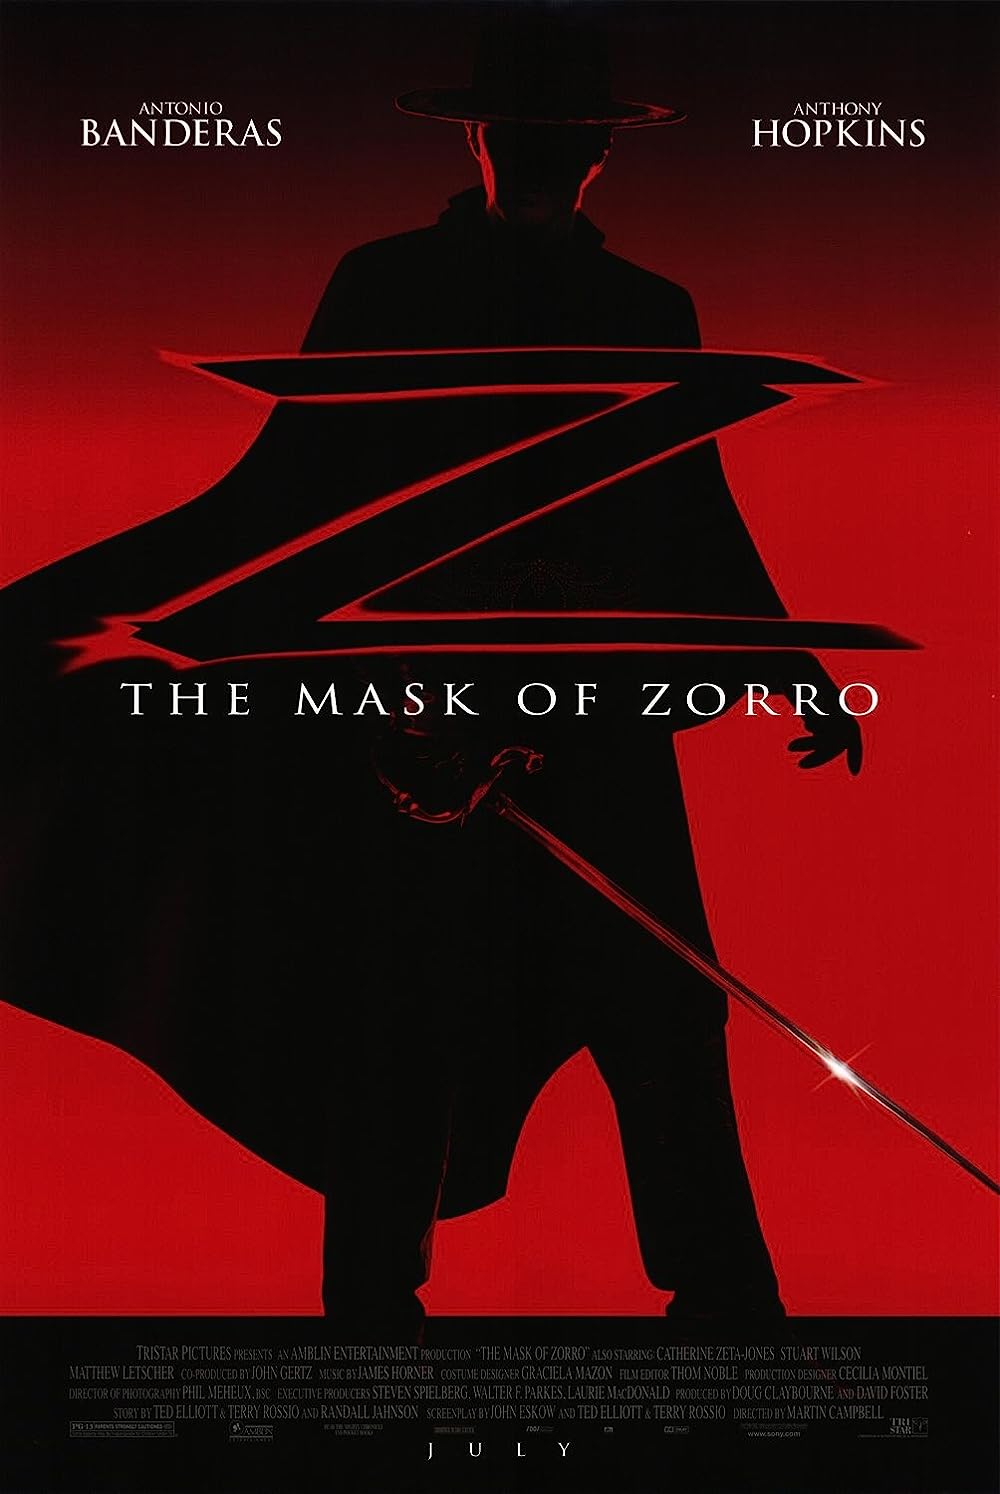 FULL MOVIE: The Mask Of Zorro (1998) [Action]